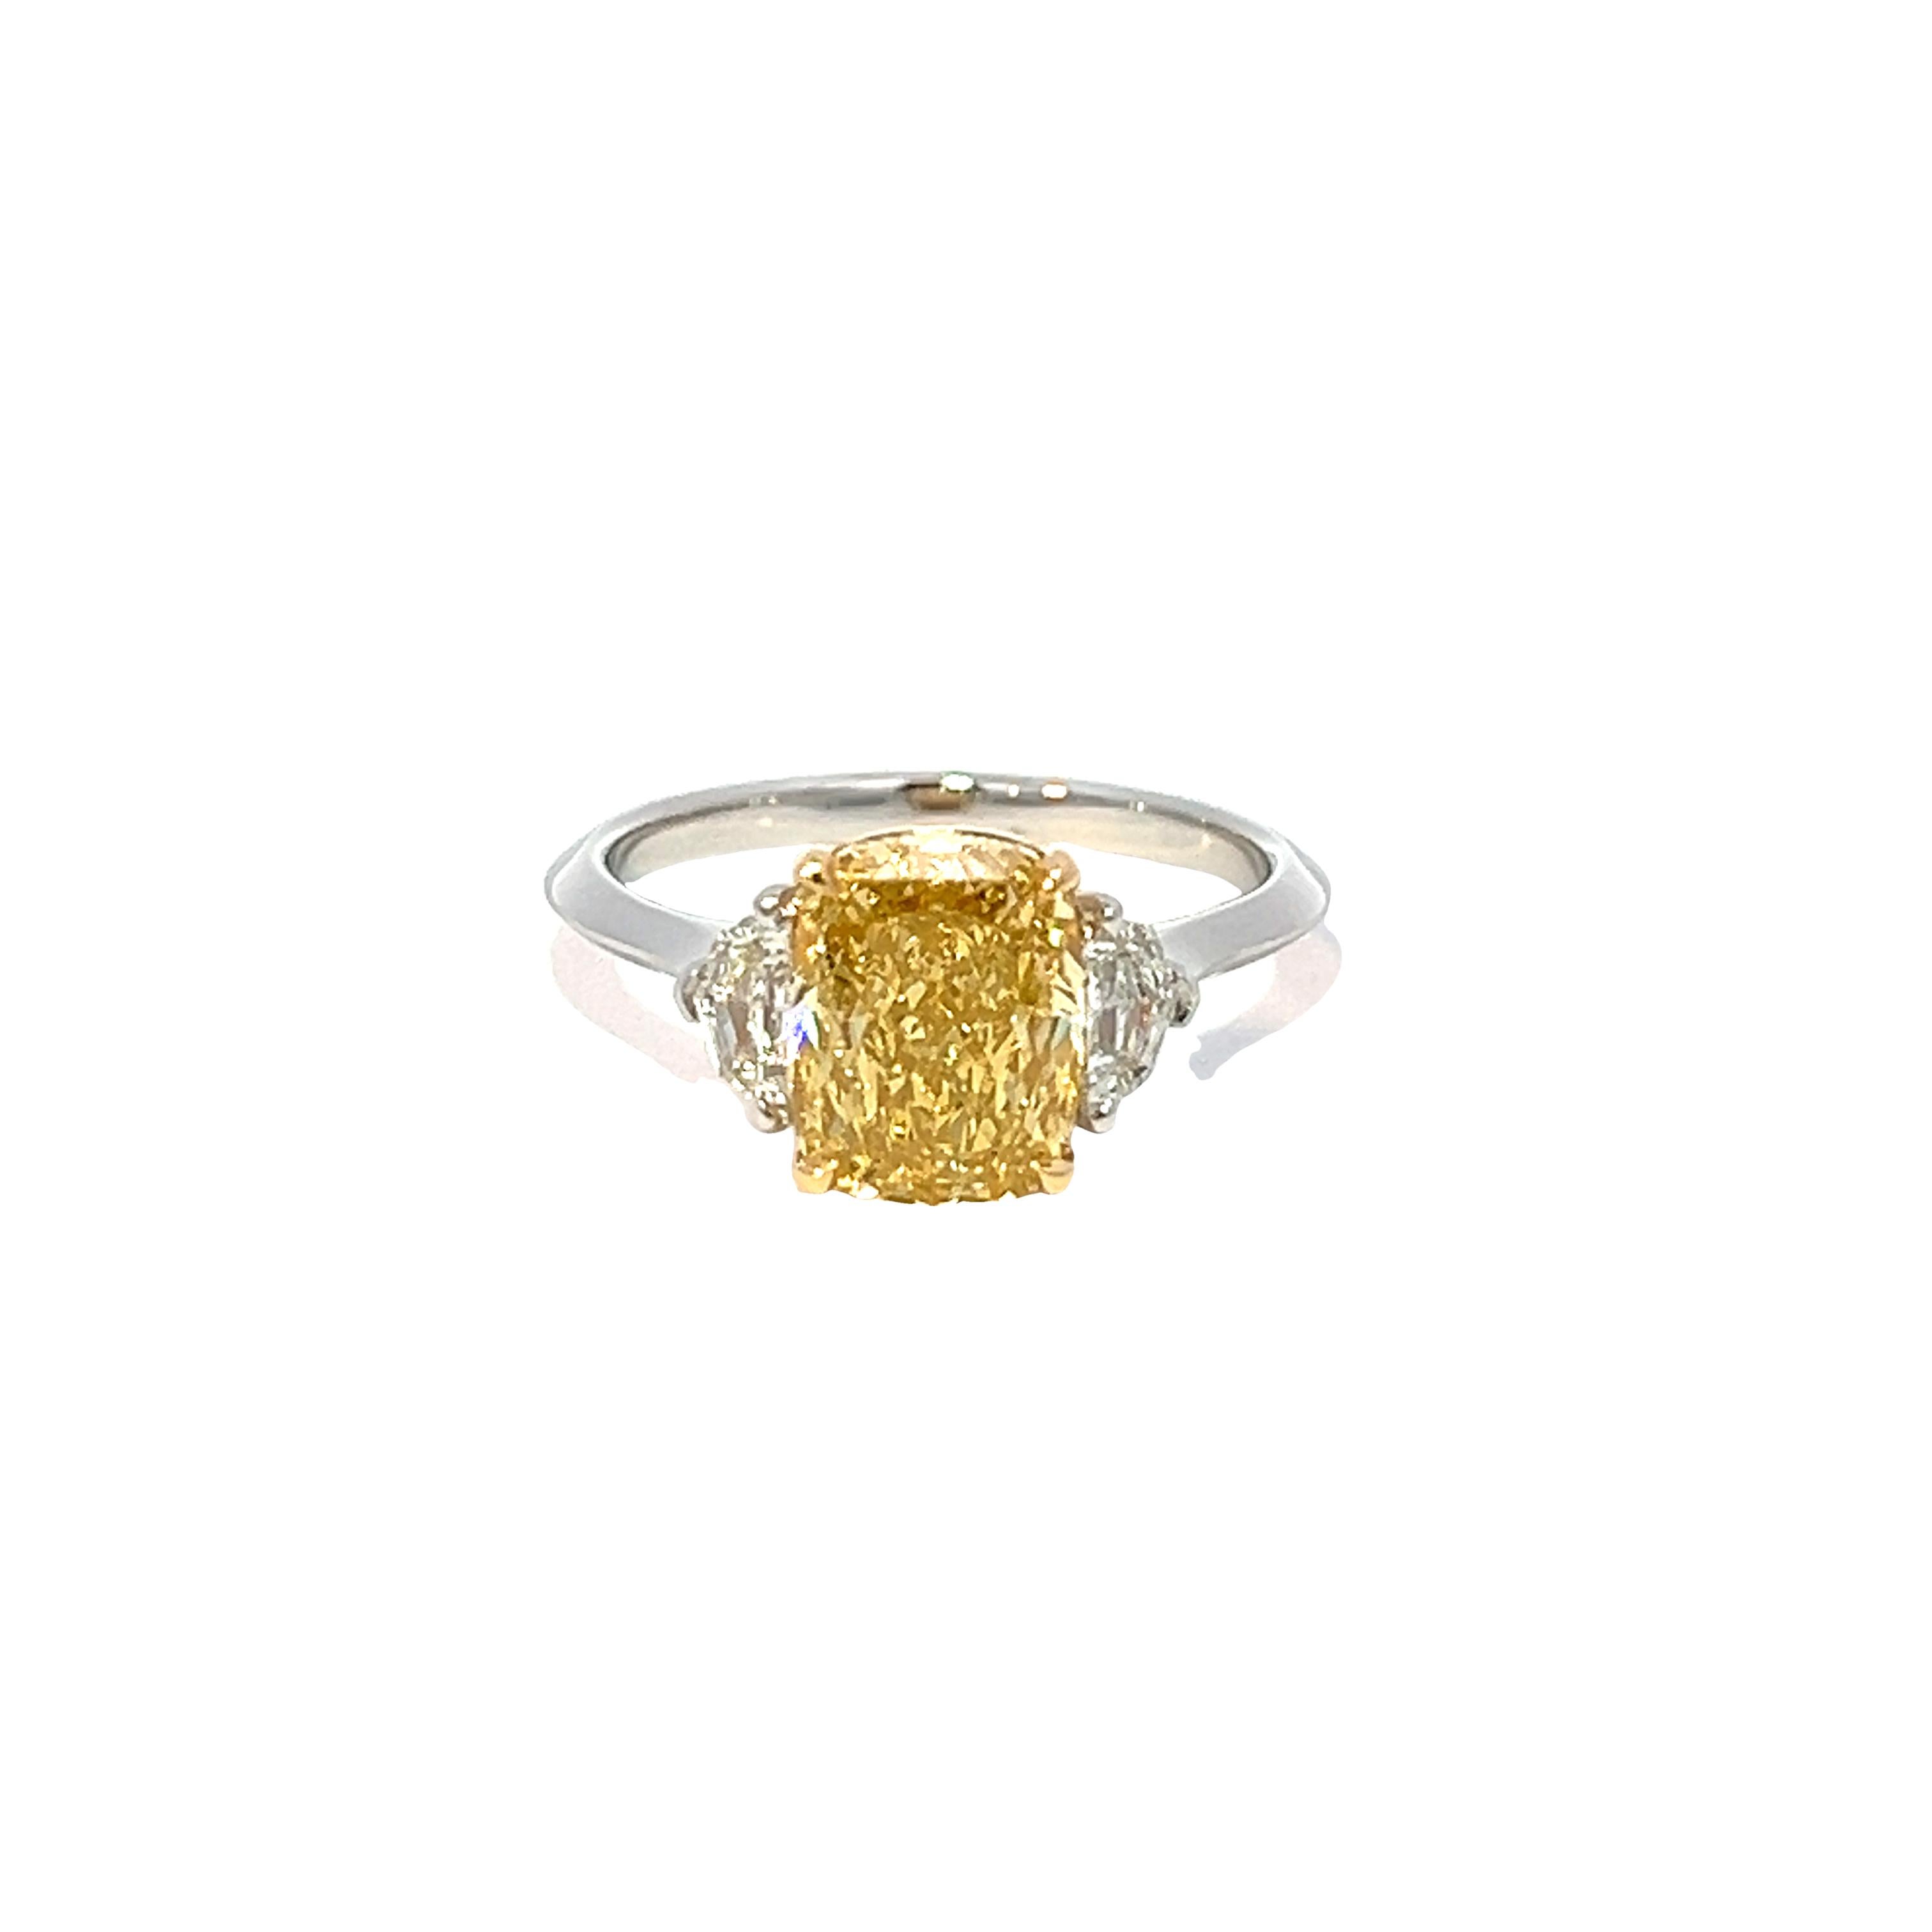 Aesthetic Movement 2.85CT Total Weight Fancy Intense Yellow Diamond Ring, GIA Cert For Sale